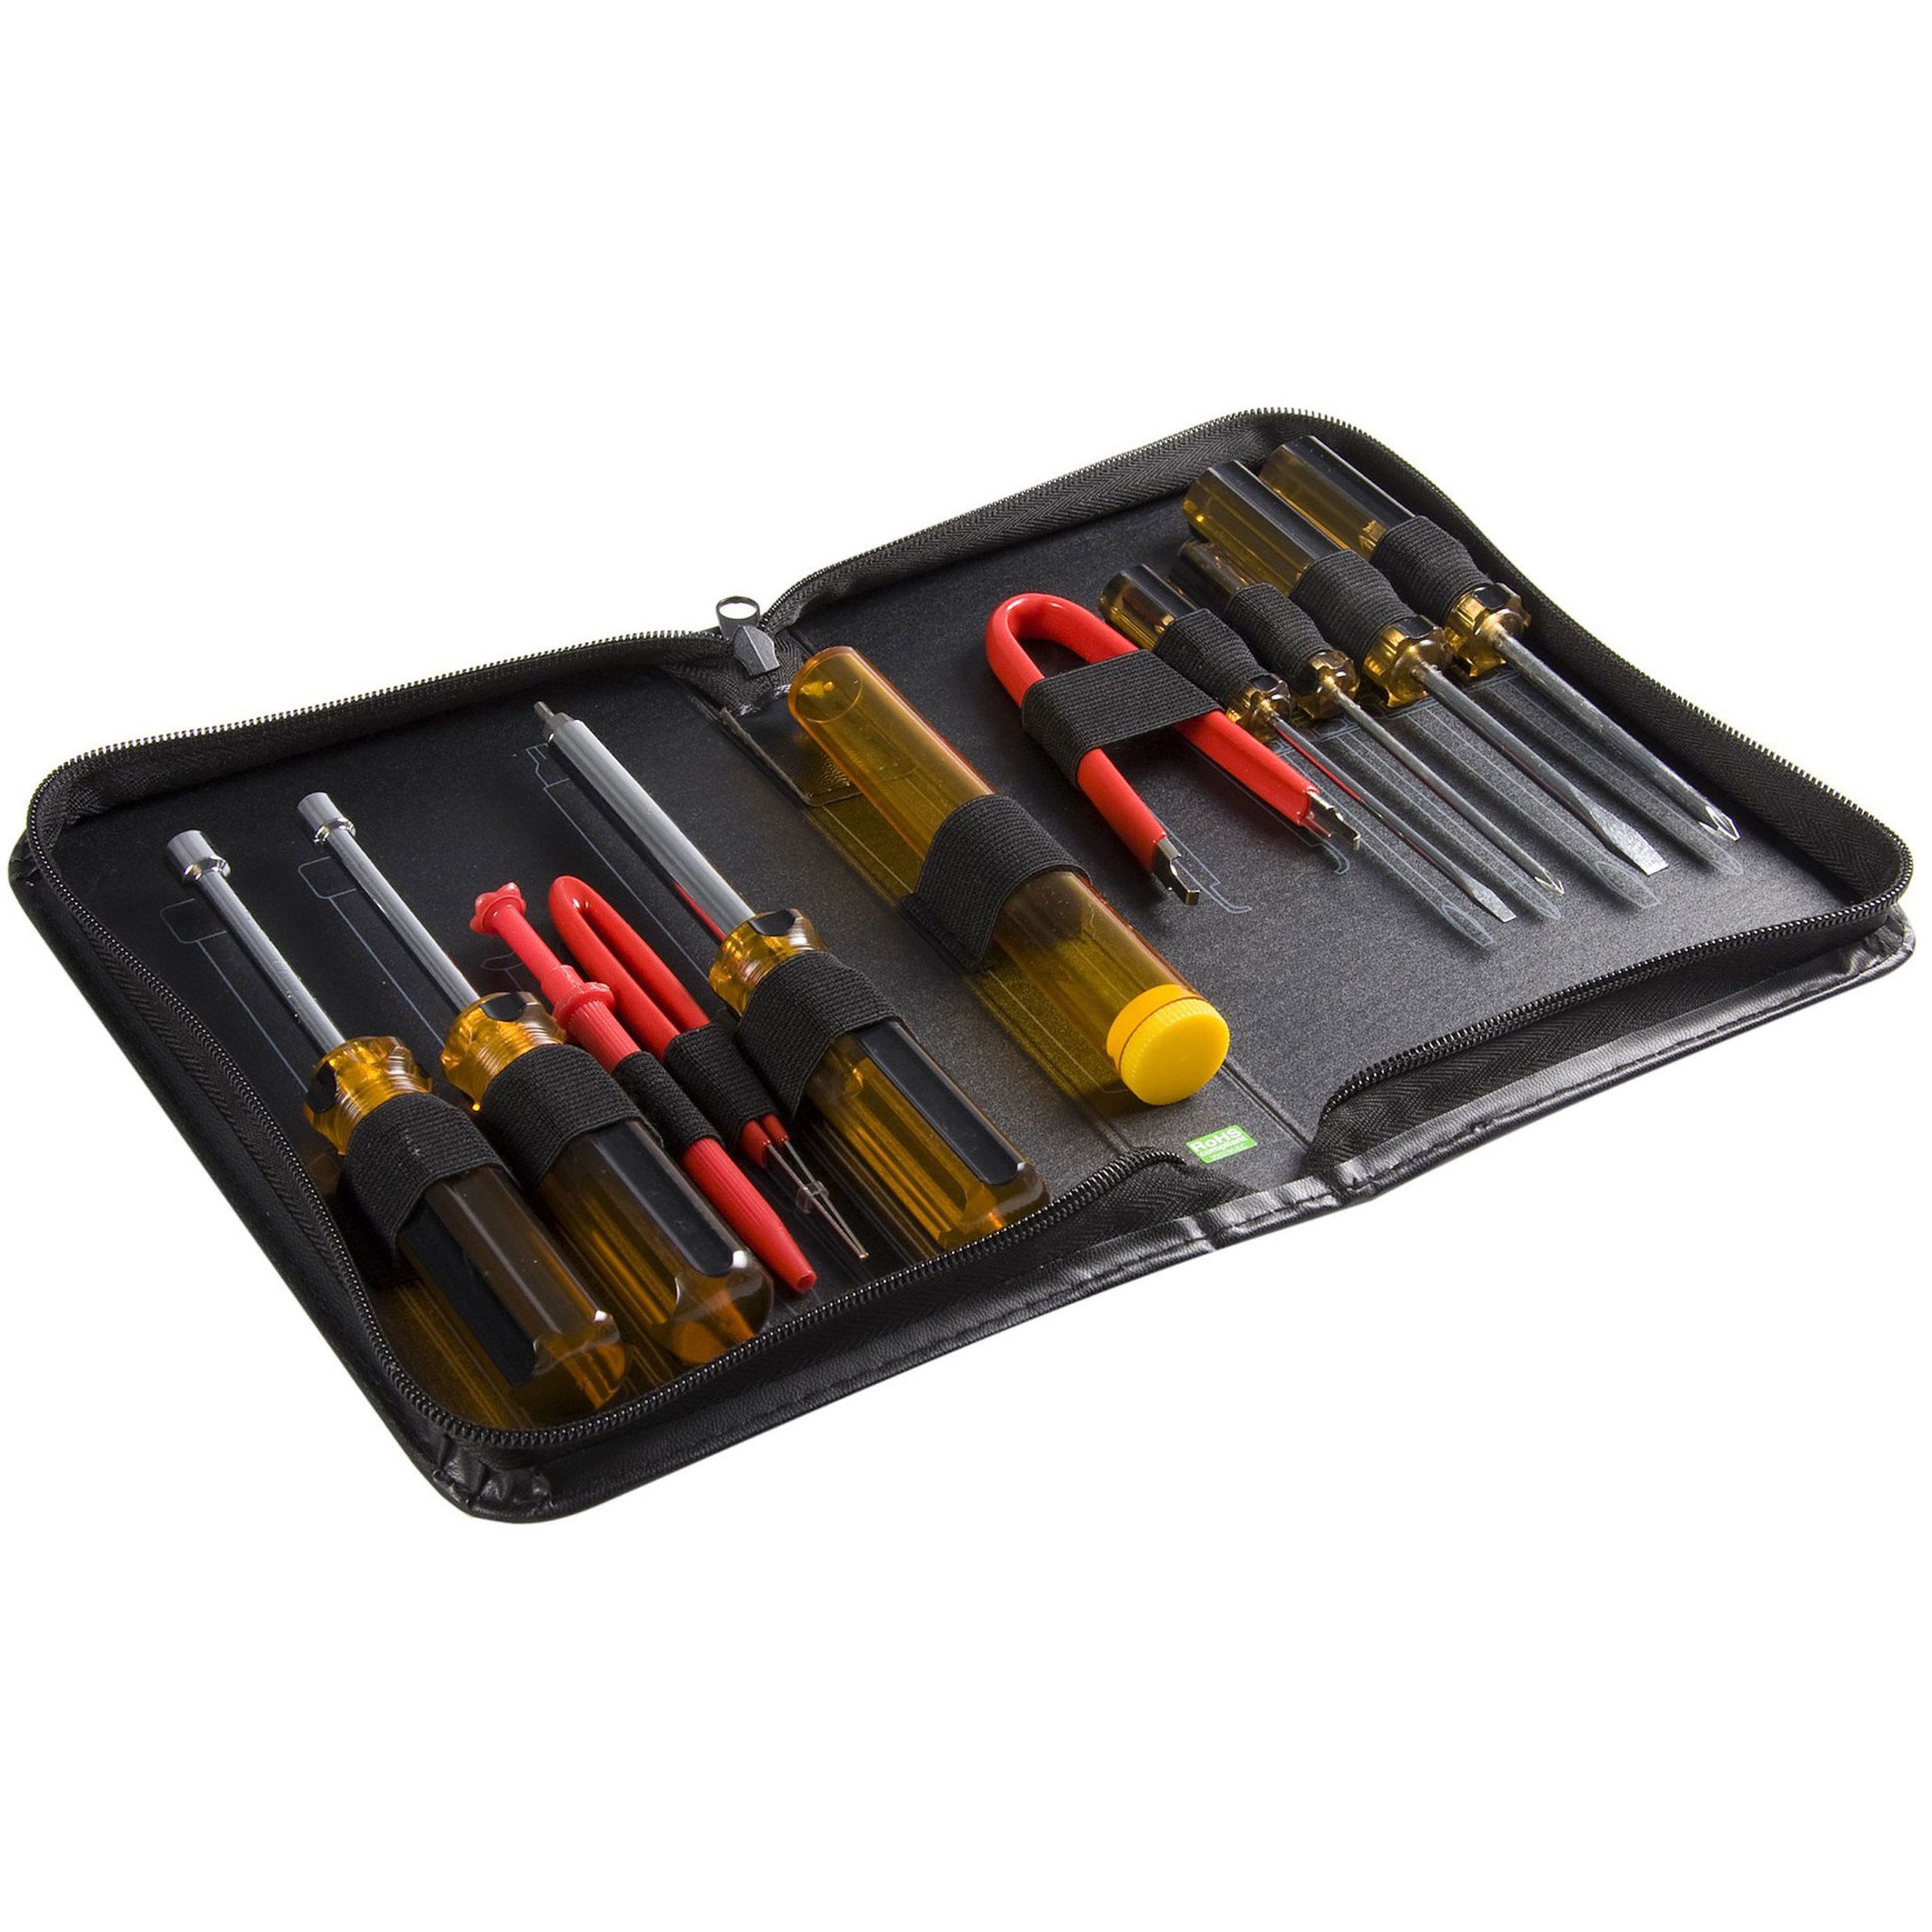 Startech .com 11 Piece PC Computer Tool Kit with Carrying CaseProvides the necessary tools to service and repair PC computerscomputer tool k… CTK200